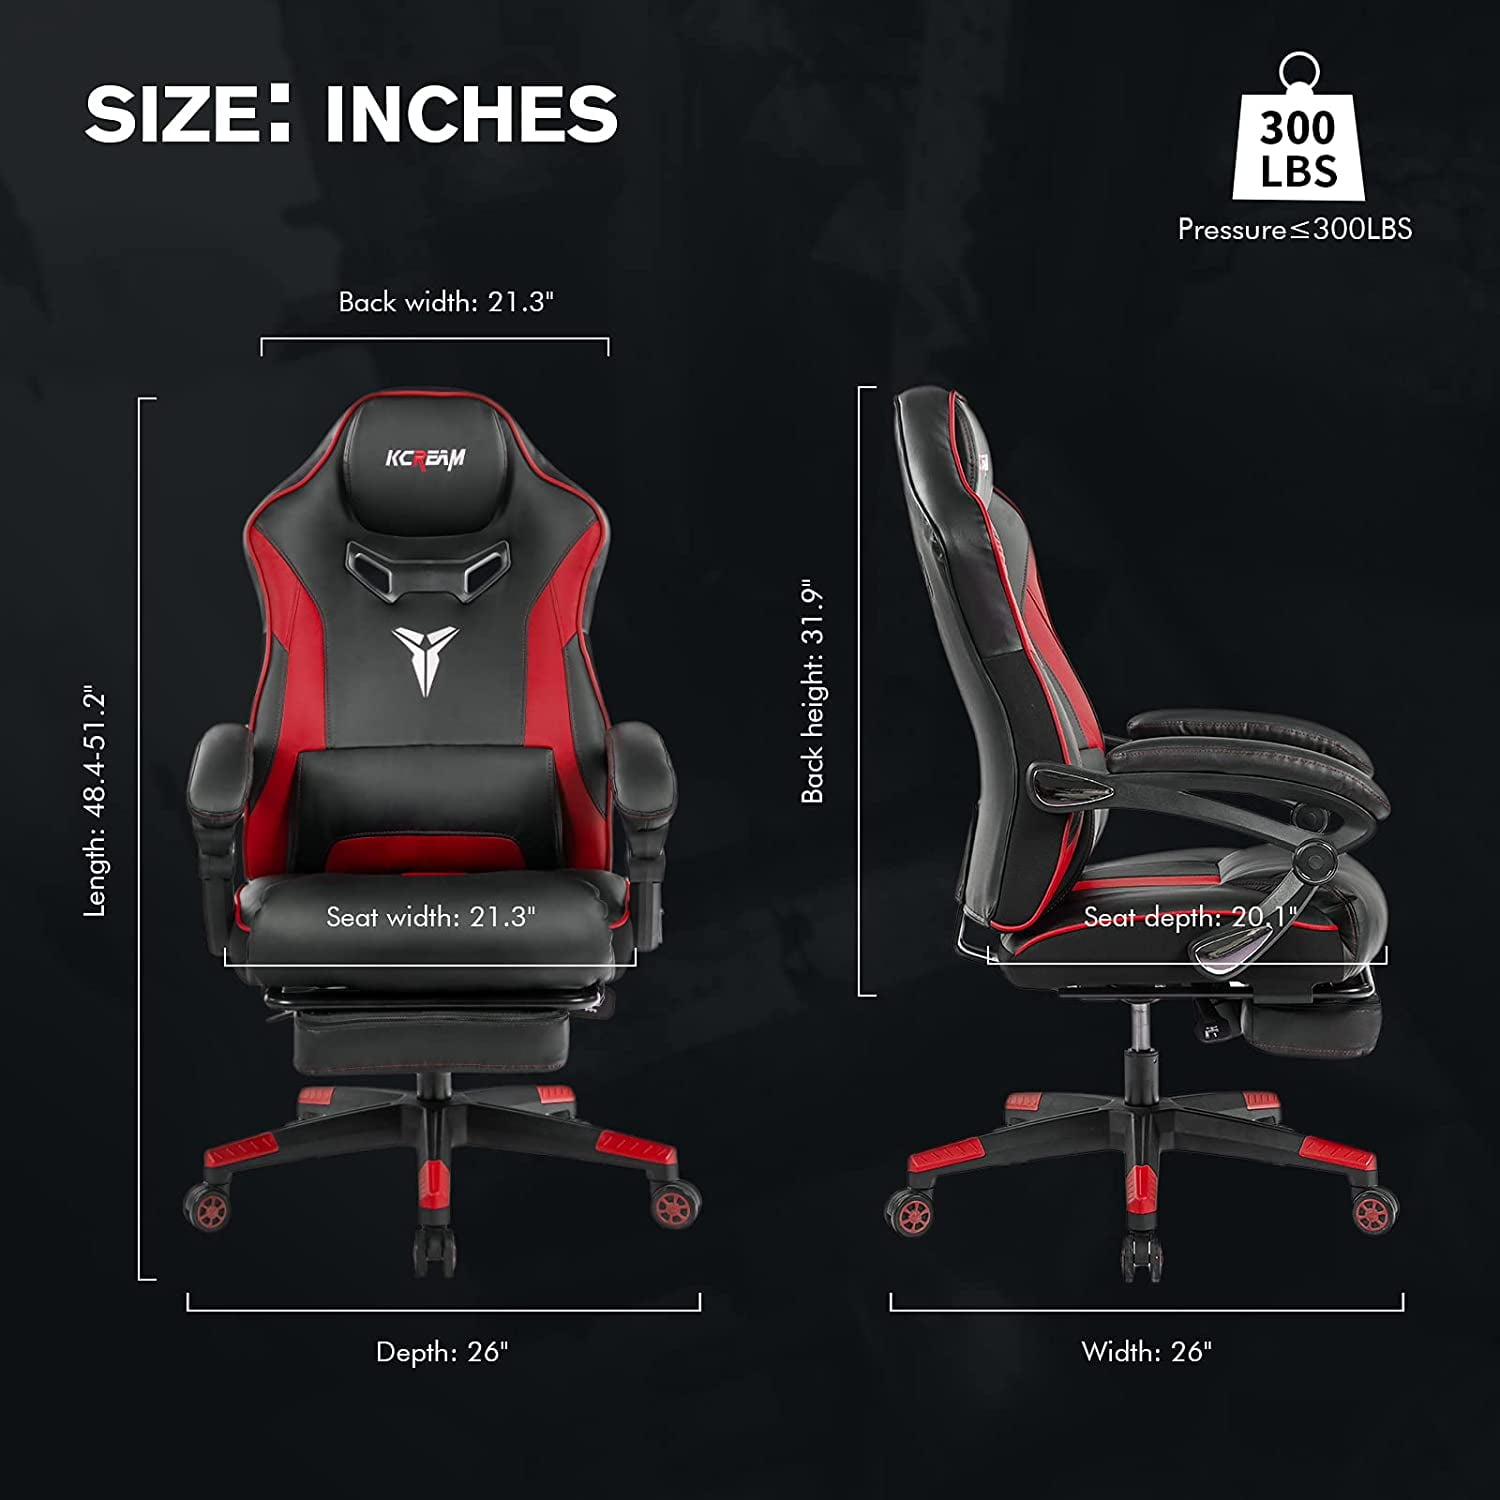 Gaming Chair with Footrest,Gaming Chair,Office Chair with Foot Rest,Anime  Gaming Chair,Gaming Chairs for Adults,for Game Room,Bedroom,Office,Living